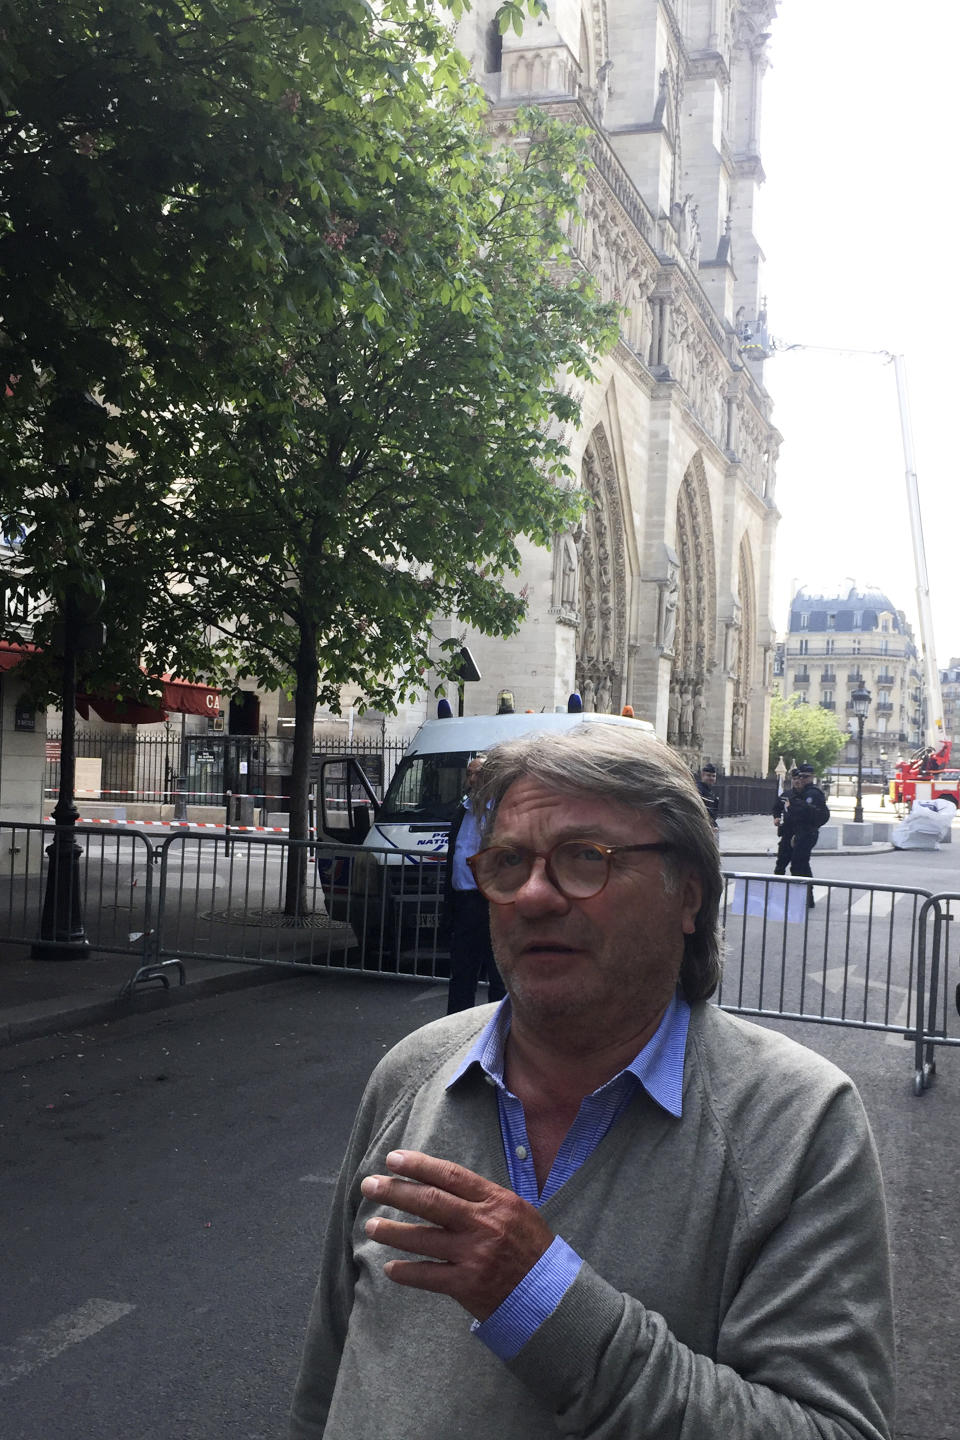 Patrice Le Jeune of Notre Dame neighborhood merchants' association walks in a street neat the cathedral, behind, in Paris, Thursday, April 18, 2019. Since Monday's fire, half the island in the middle of the Seine has been closed to visitors. Residents who had never met before suddenly find themselves the only customers of restaurants and cafés normally filled with tourists. At Quasimodo Notre Dame bar, named for Victor Hugo's hunchback, storekeepers commiserate. (AP Photo/Nicolas Vaux-Montagny)